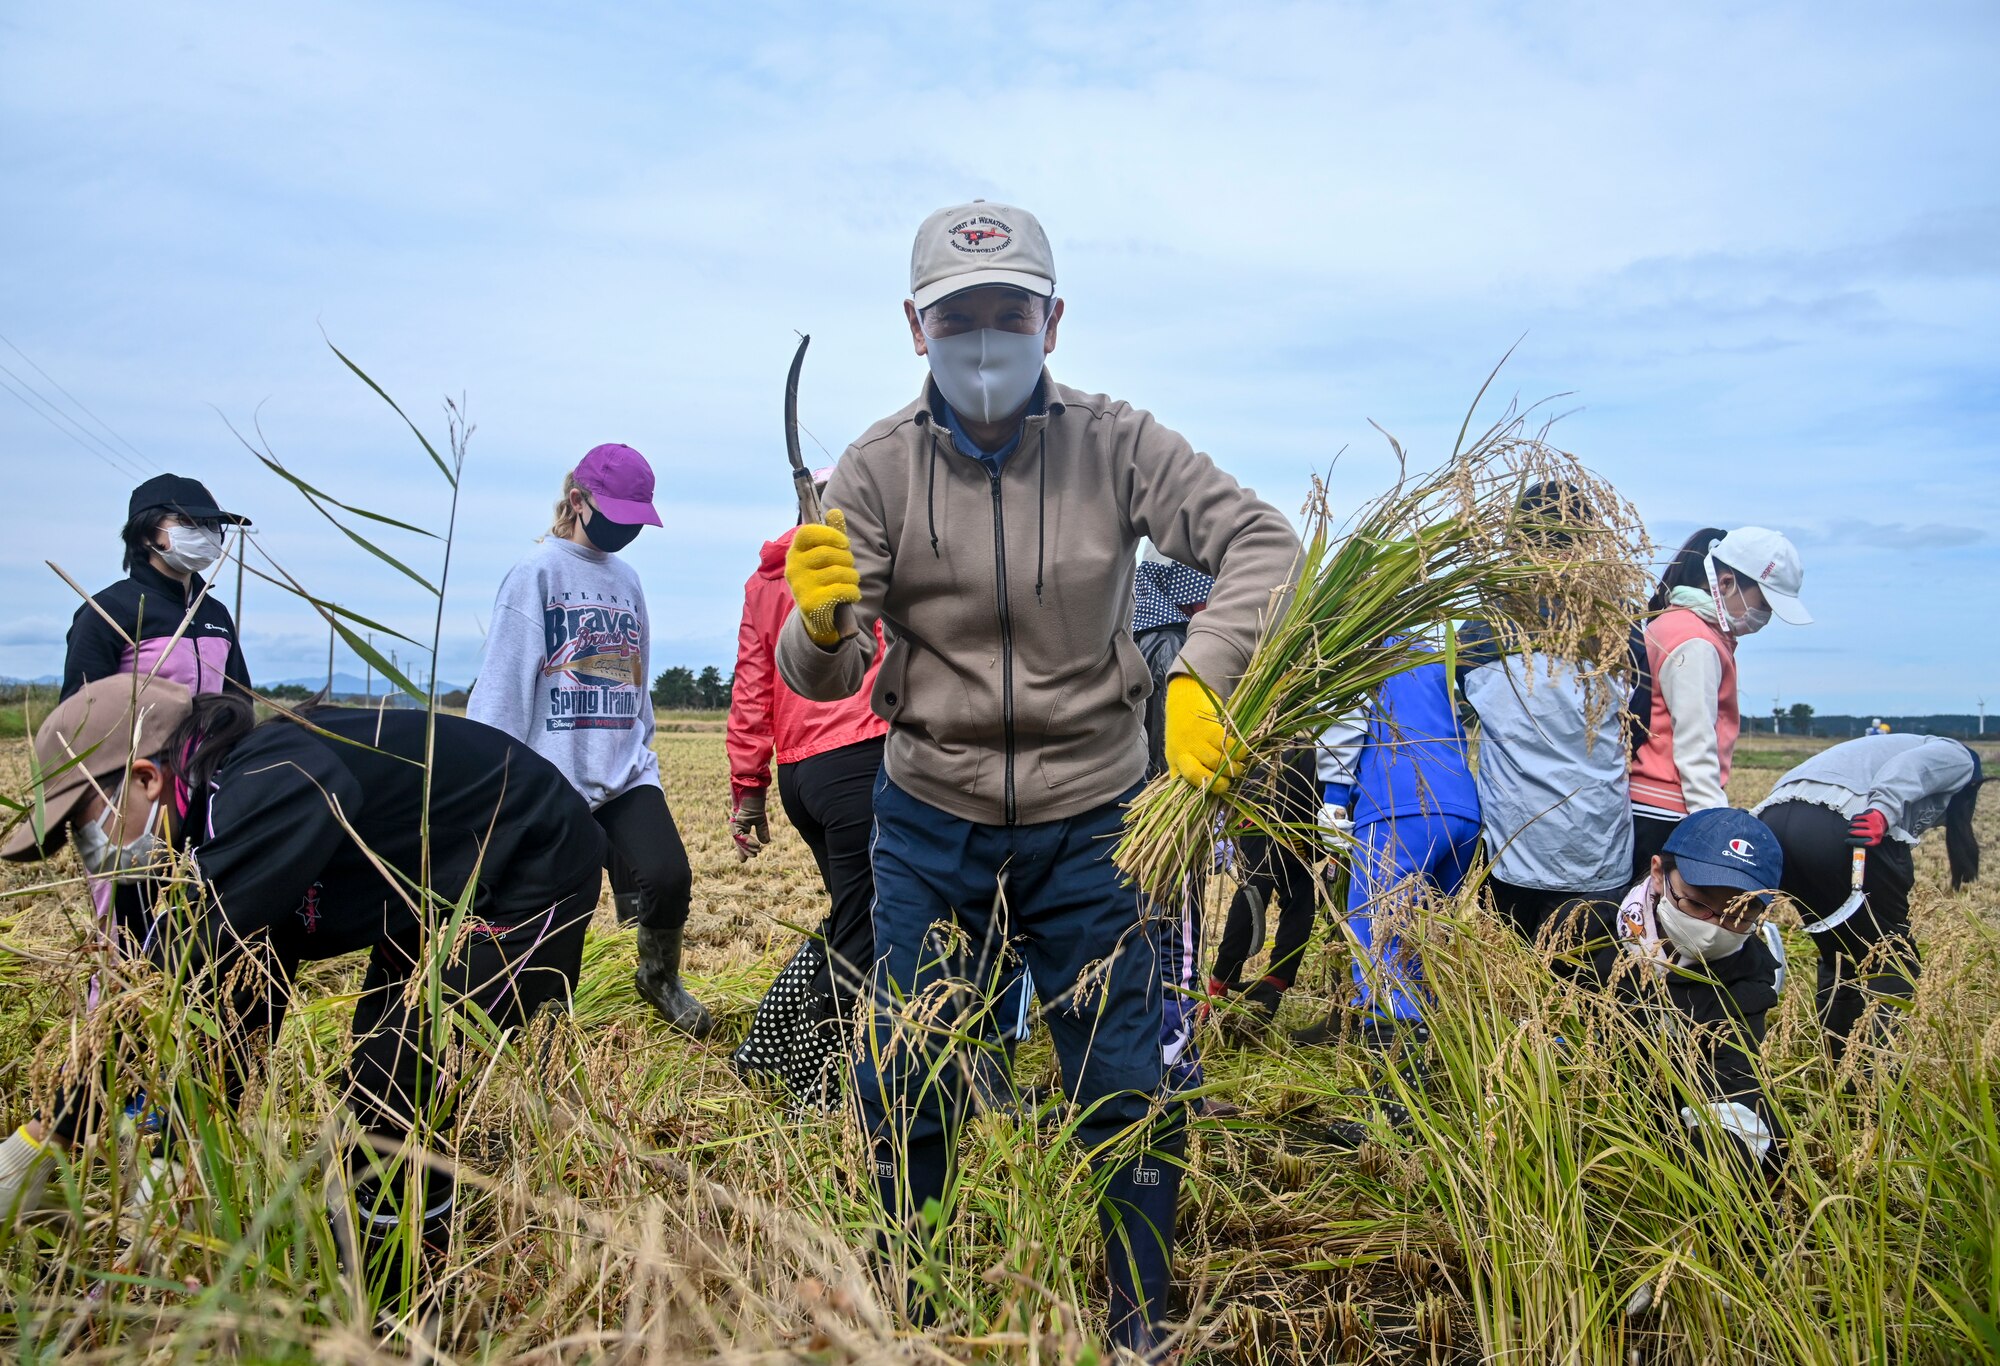 Misawa Mayor Yoshinori Kohiyama poses for a photo during a community relations event in Misawa City, Japan, Oct. 8, 2020. Kohiyama and U.S. Air Force Col. Jesse J. Friedel, 35th Fighter Wing commander, joined students from Oozora Elementary School to harvest rice. (U.S. Air Force photo by Tech. Sgt. Timothy Moore)